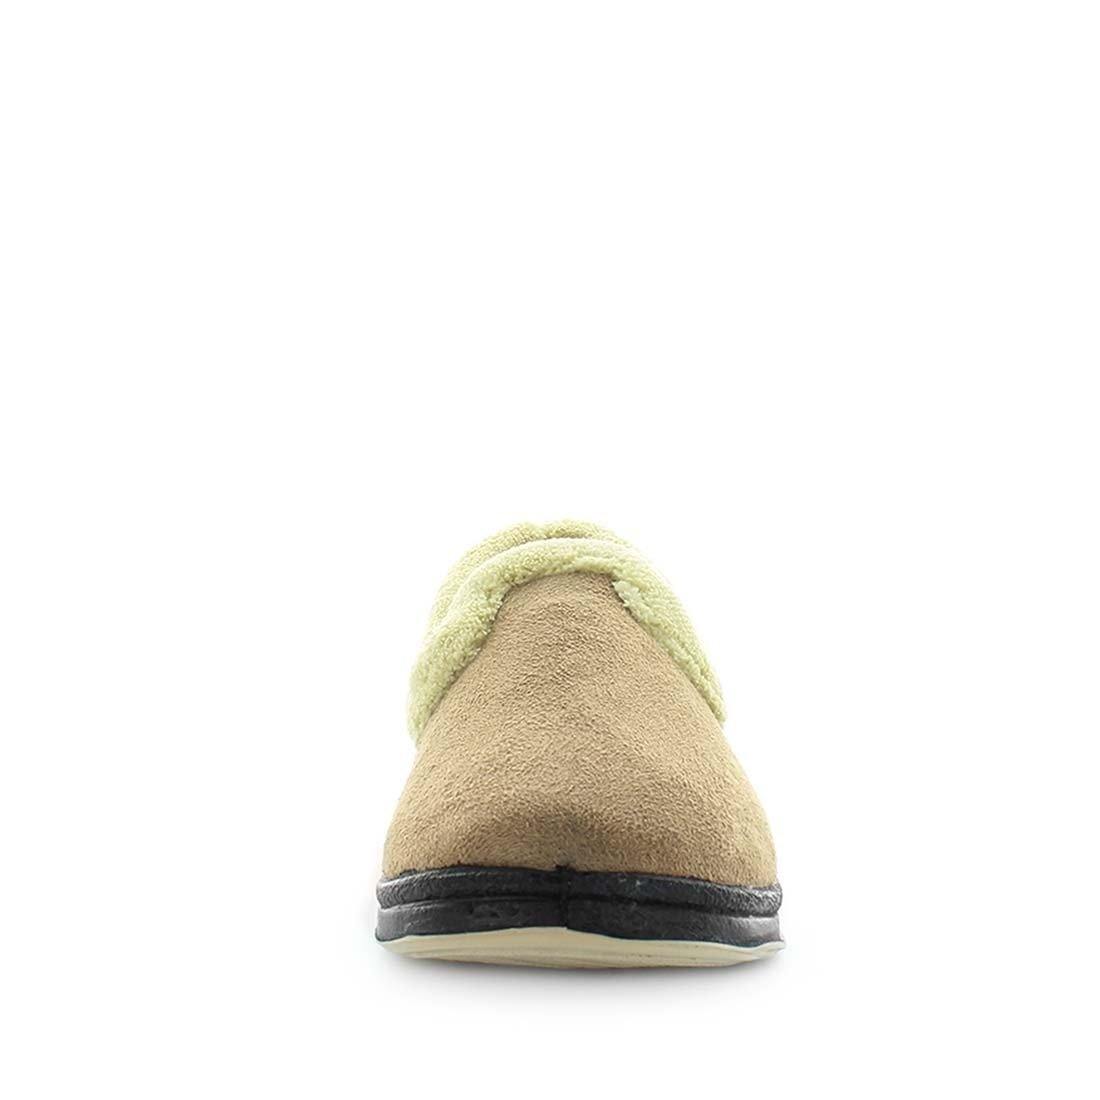 Load image into Gallery viewer, Classic womens slip on slipper, Emille by panda slippers. A camel slipper made with soft materials and comfy fit design for the perfect indoor slipper. showing a non slip sole and micro terry trimming,
